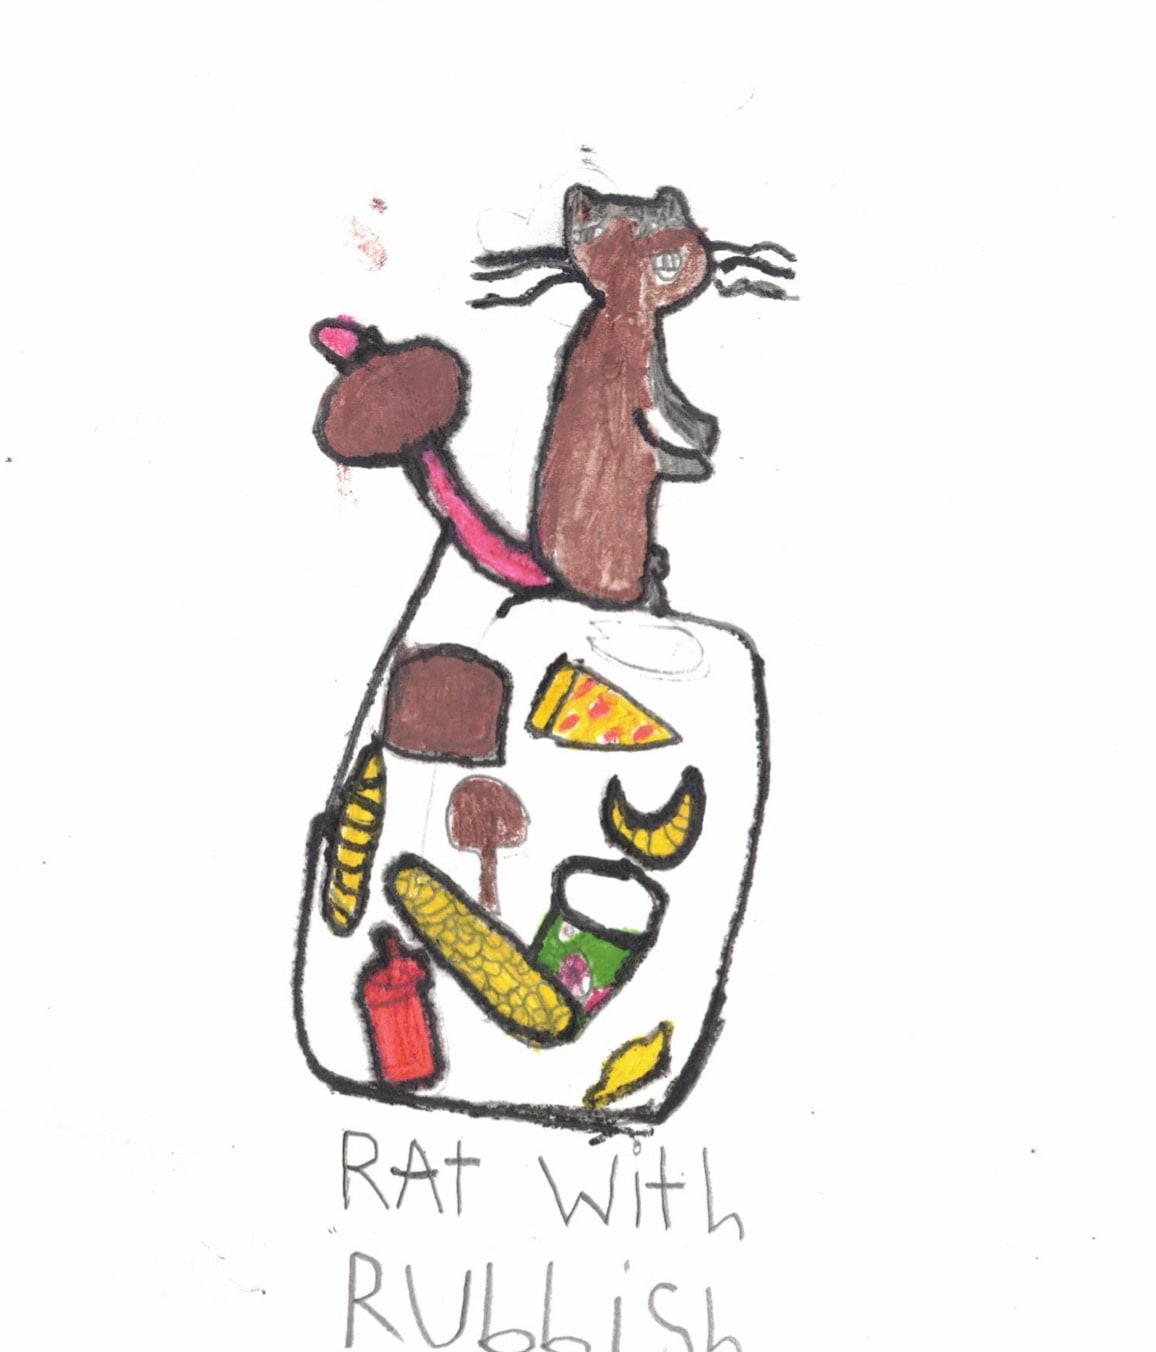 Rosewood+Calder "Rat with Rubbish" colorful crayon drawing, the rat looks smugly sitting atop a pile of food